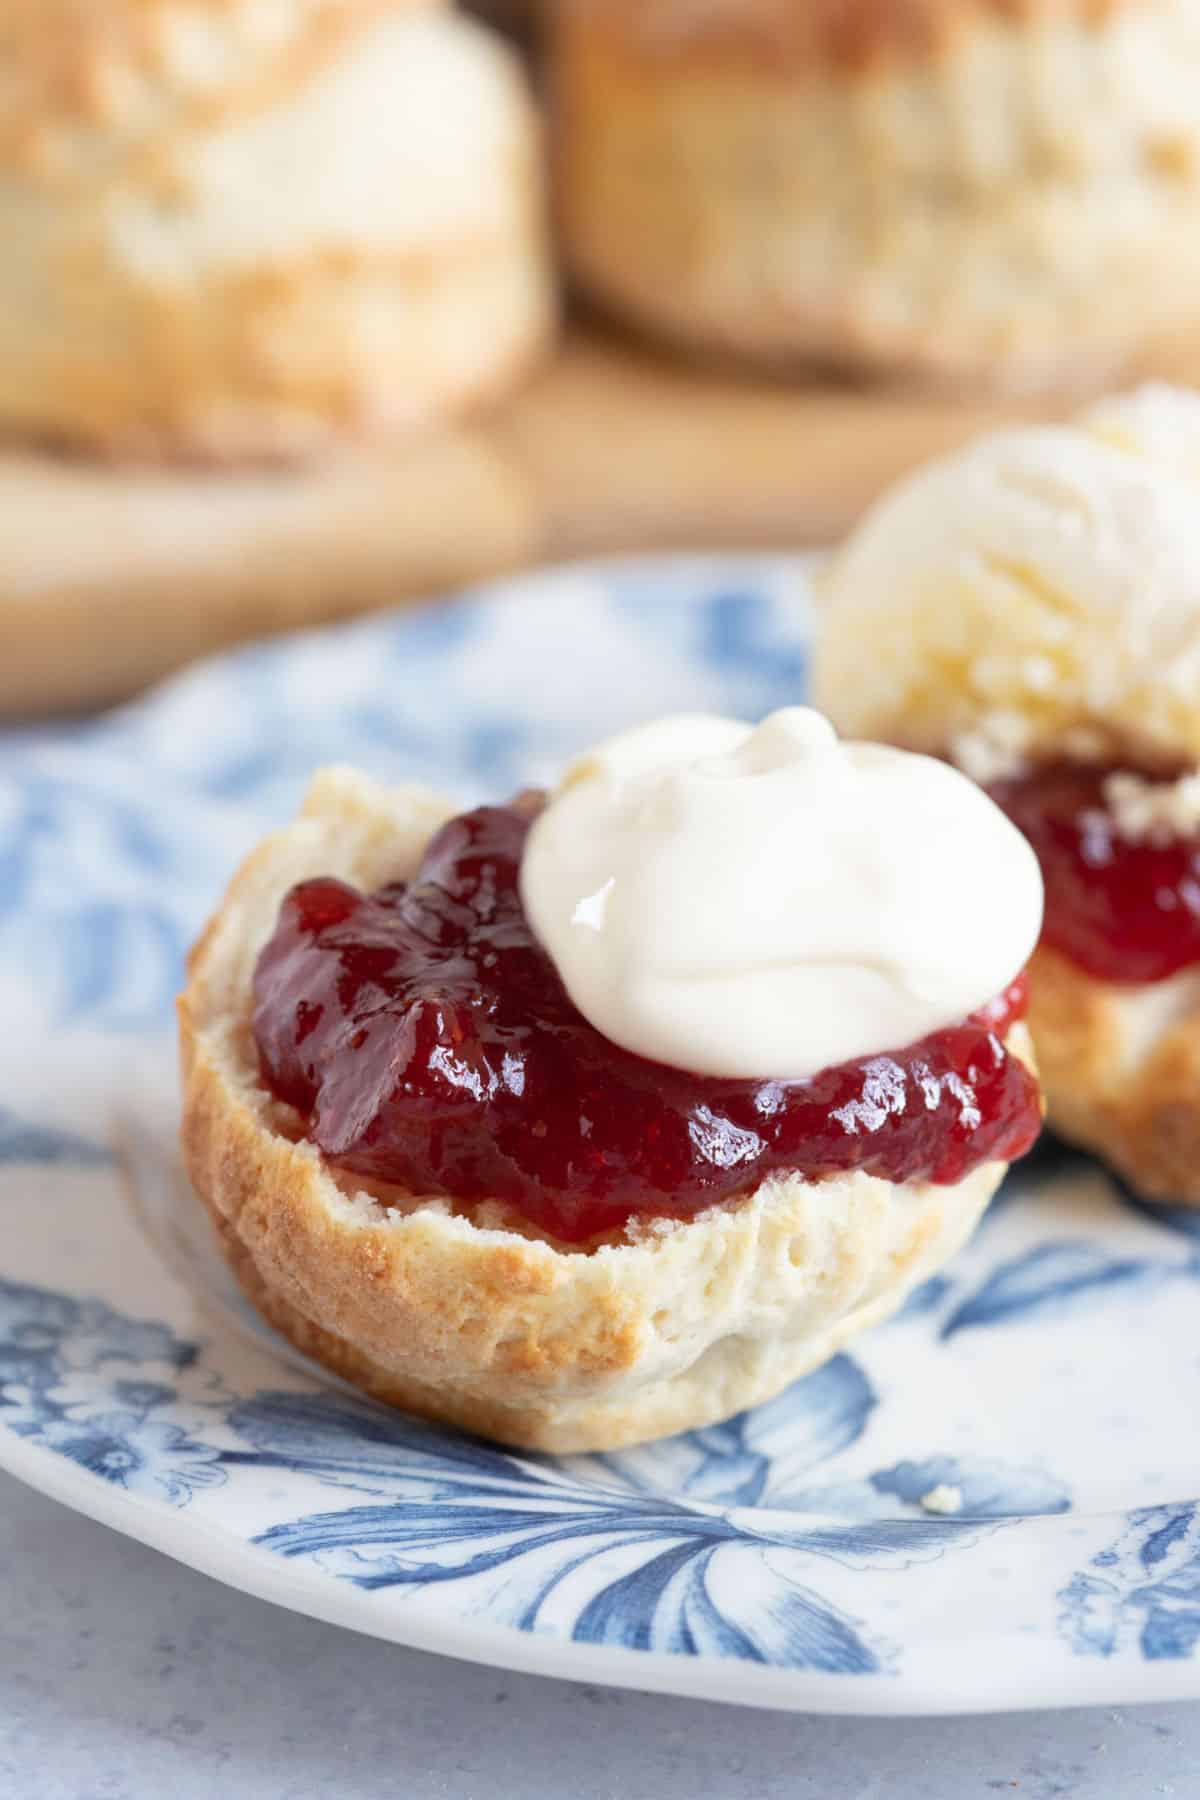 A scone with jam and clotted cream.